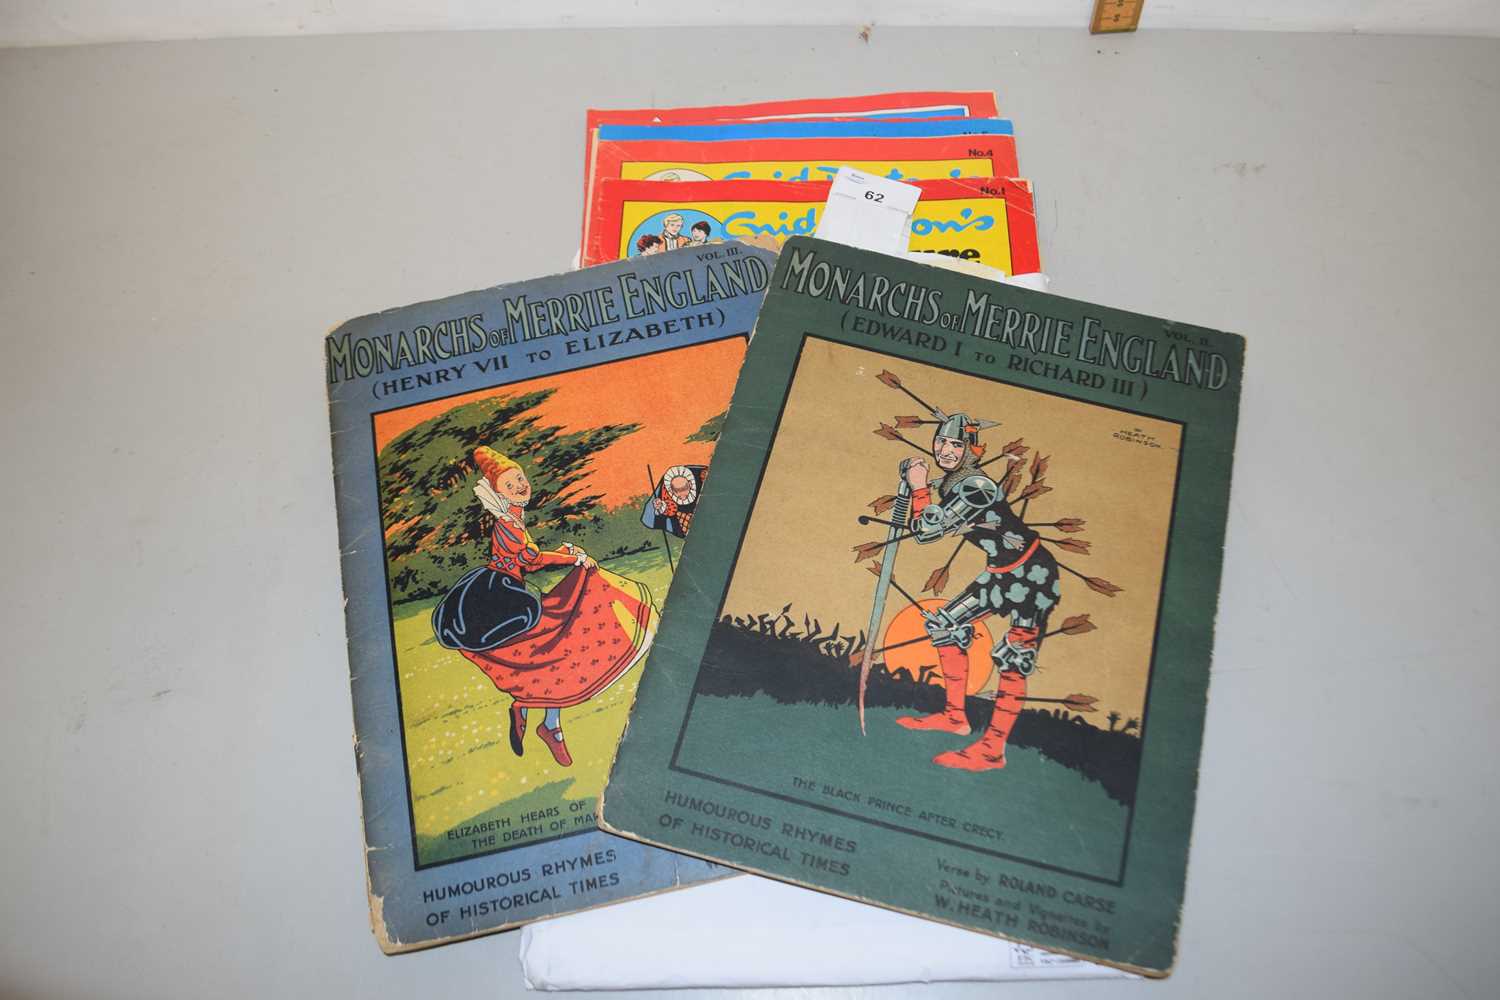 Mixed Lot: Enid Blyton Adventure magazines together with Monarchs of Merrie England magazines